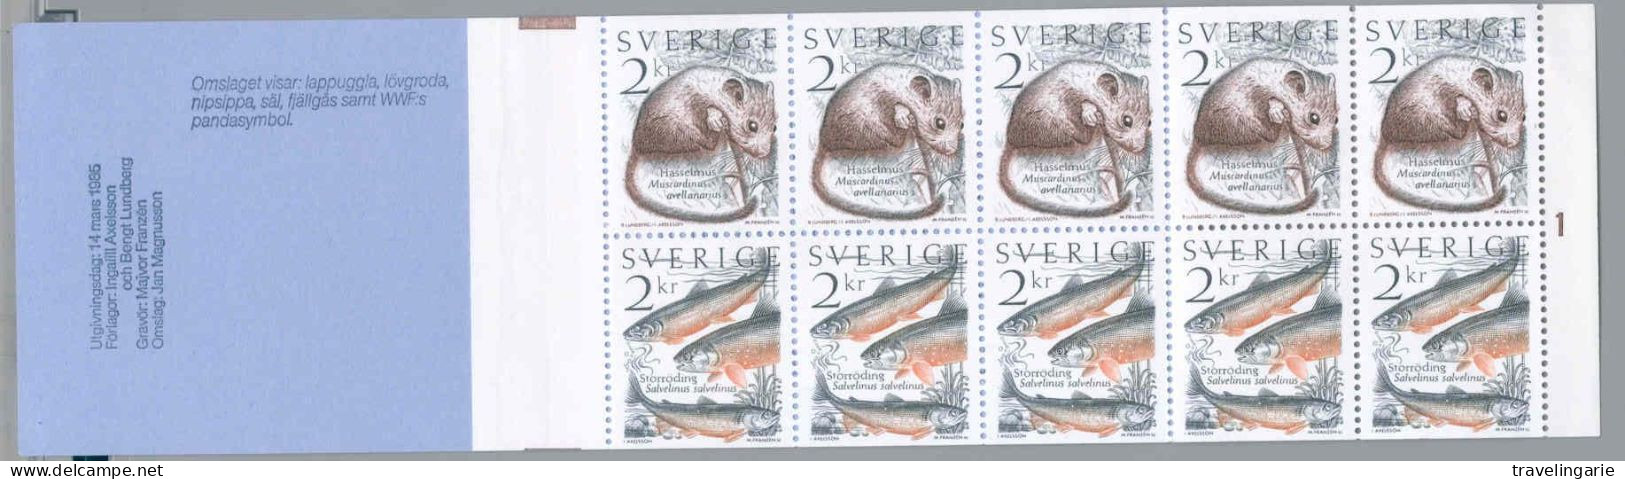 Sweden 1985 Stamp Booklet Living Nature With WWF Panda On Cover MNH ** - Unused Stamps